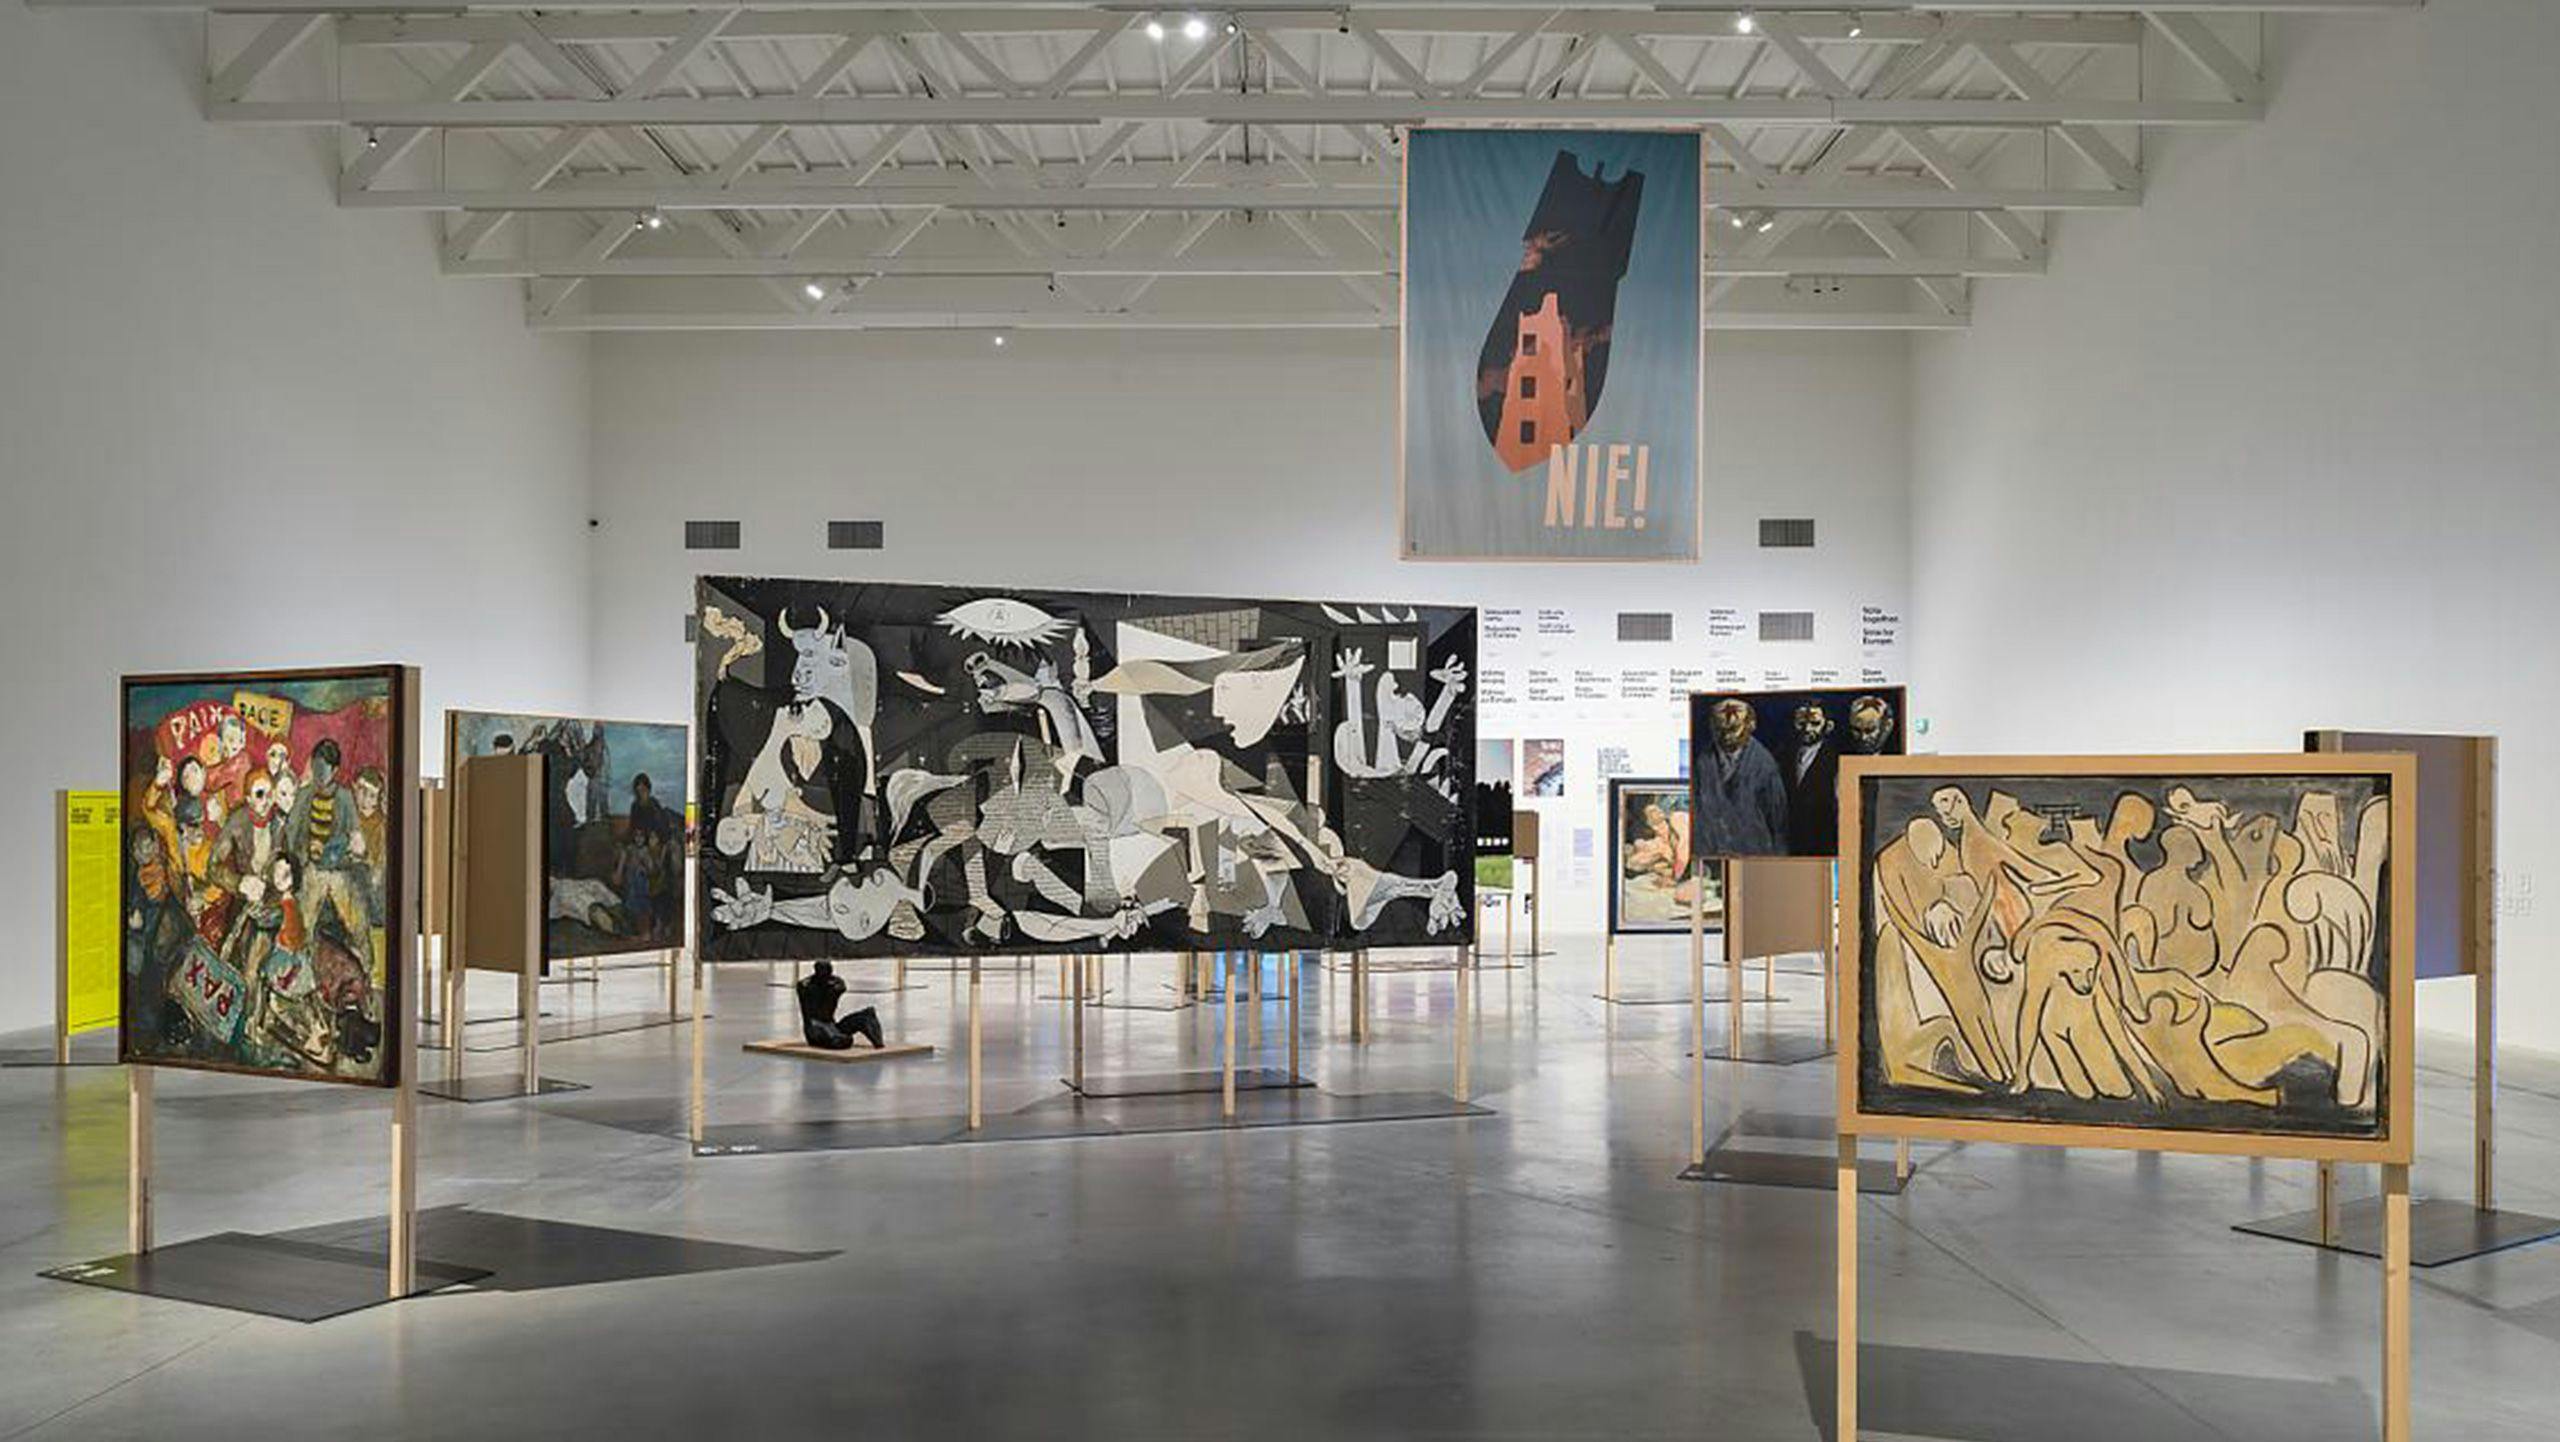 An Installation view of NEVER AGAIN: Art against War and Fascism in the 20th and 21st centuries, Museum of Modern Art, Warsaw, dated 2019